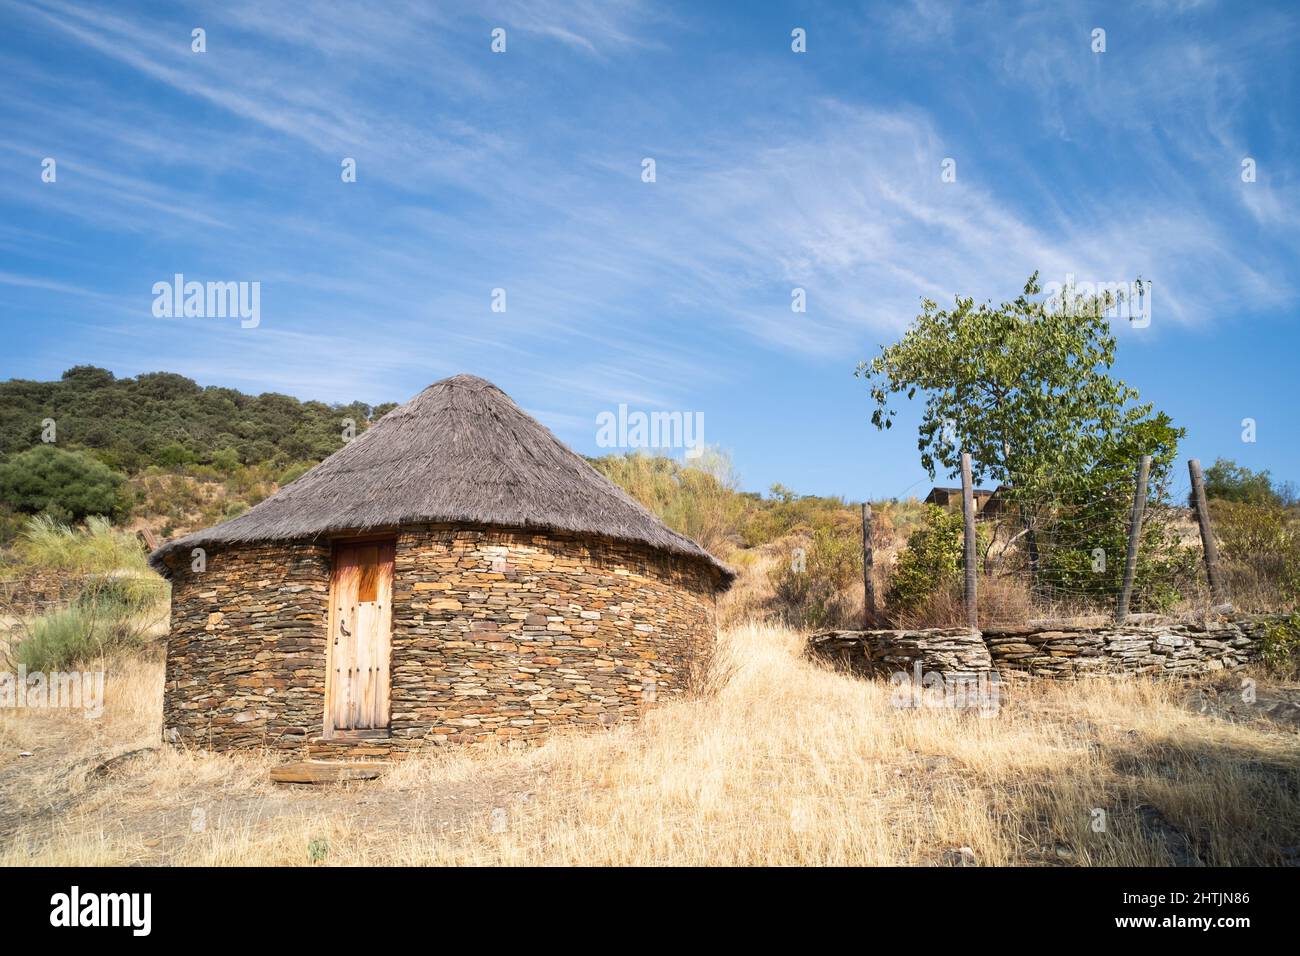 Old cabin or hut with a round shape and slate stone walls and a broom and straw roof Stock Photo